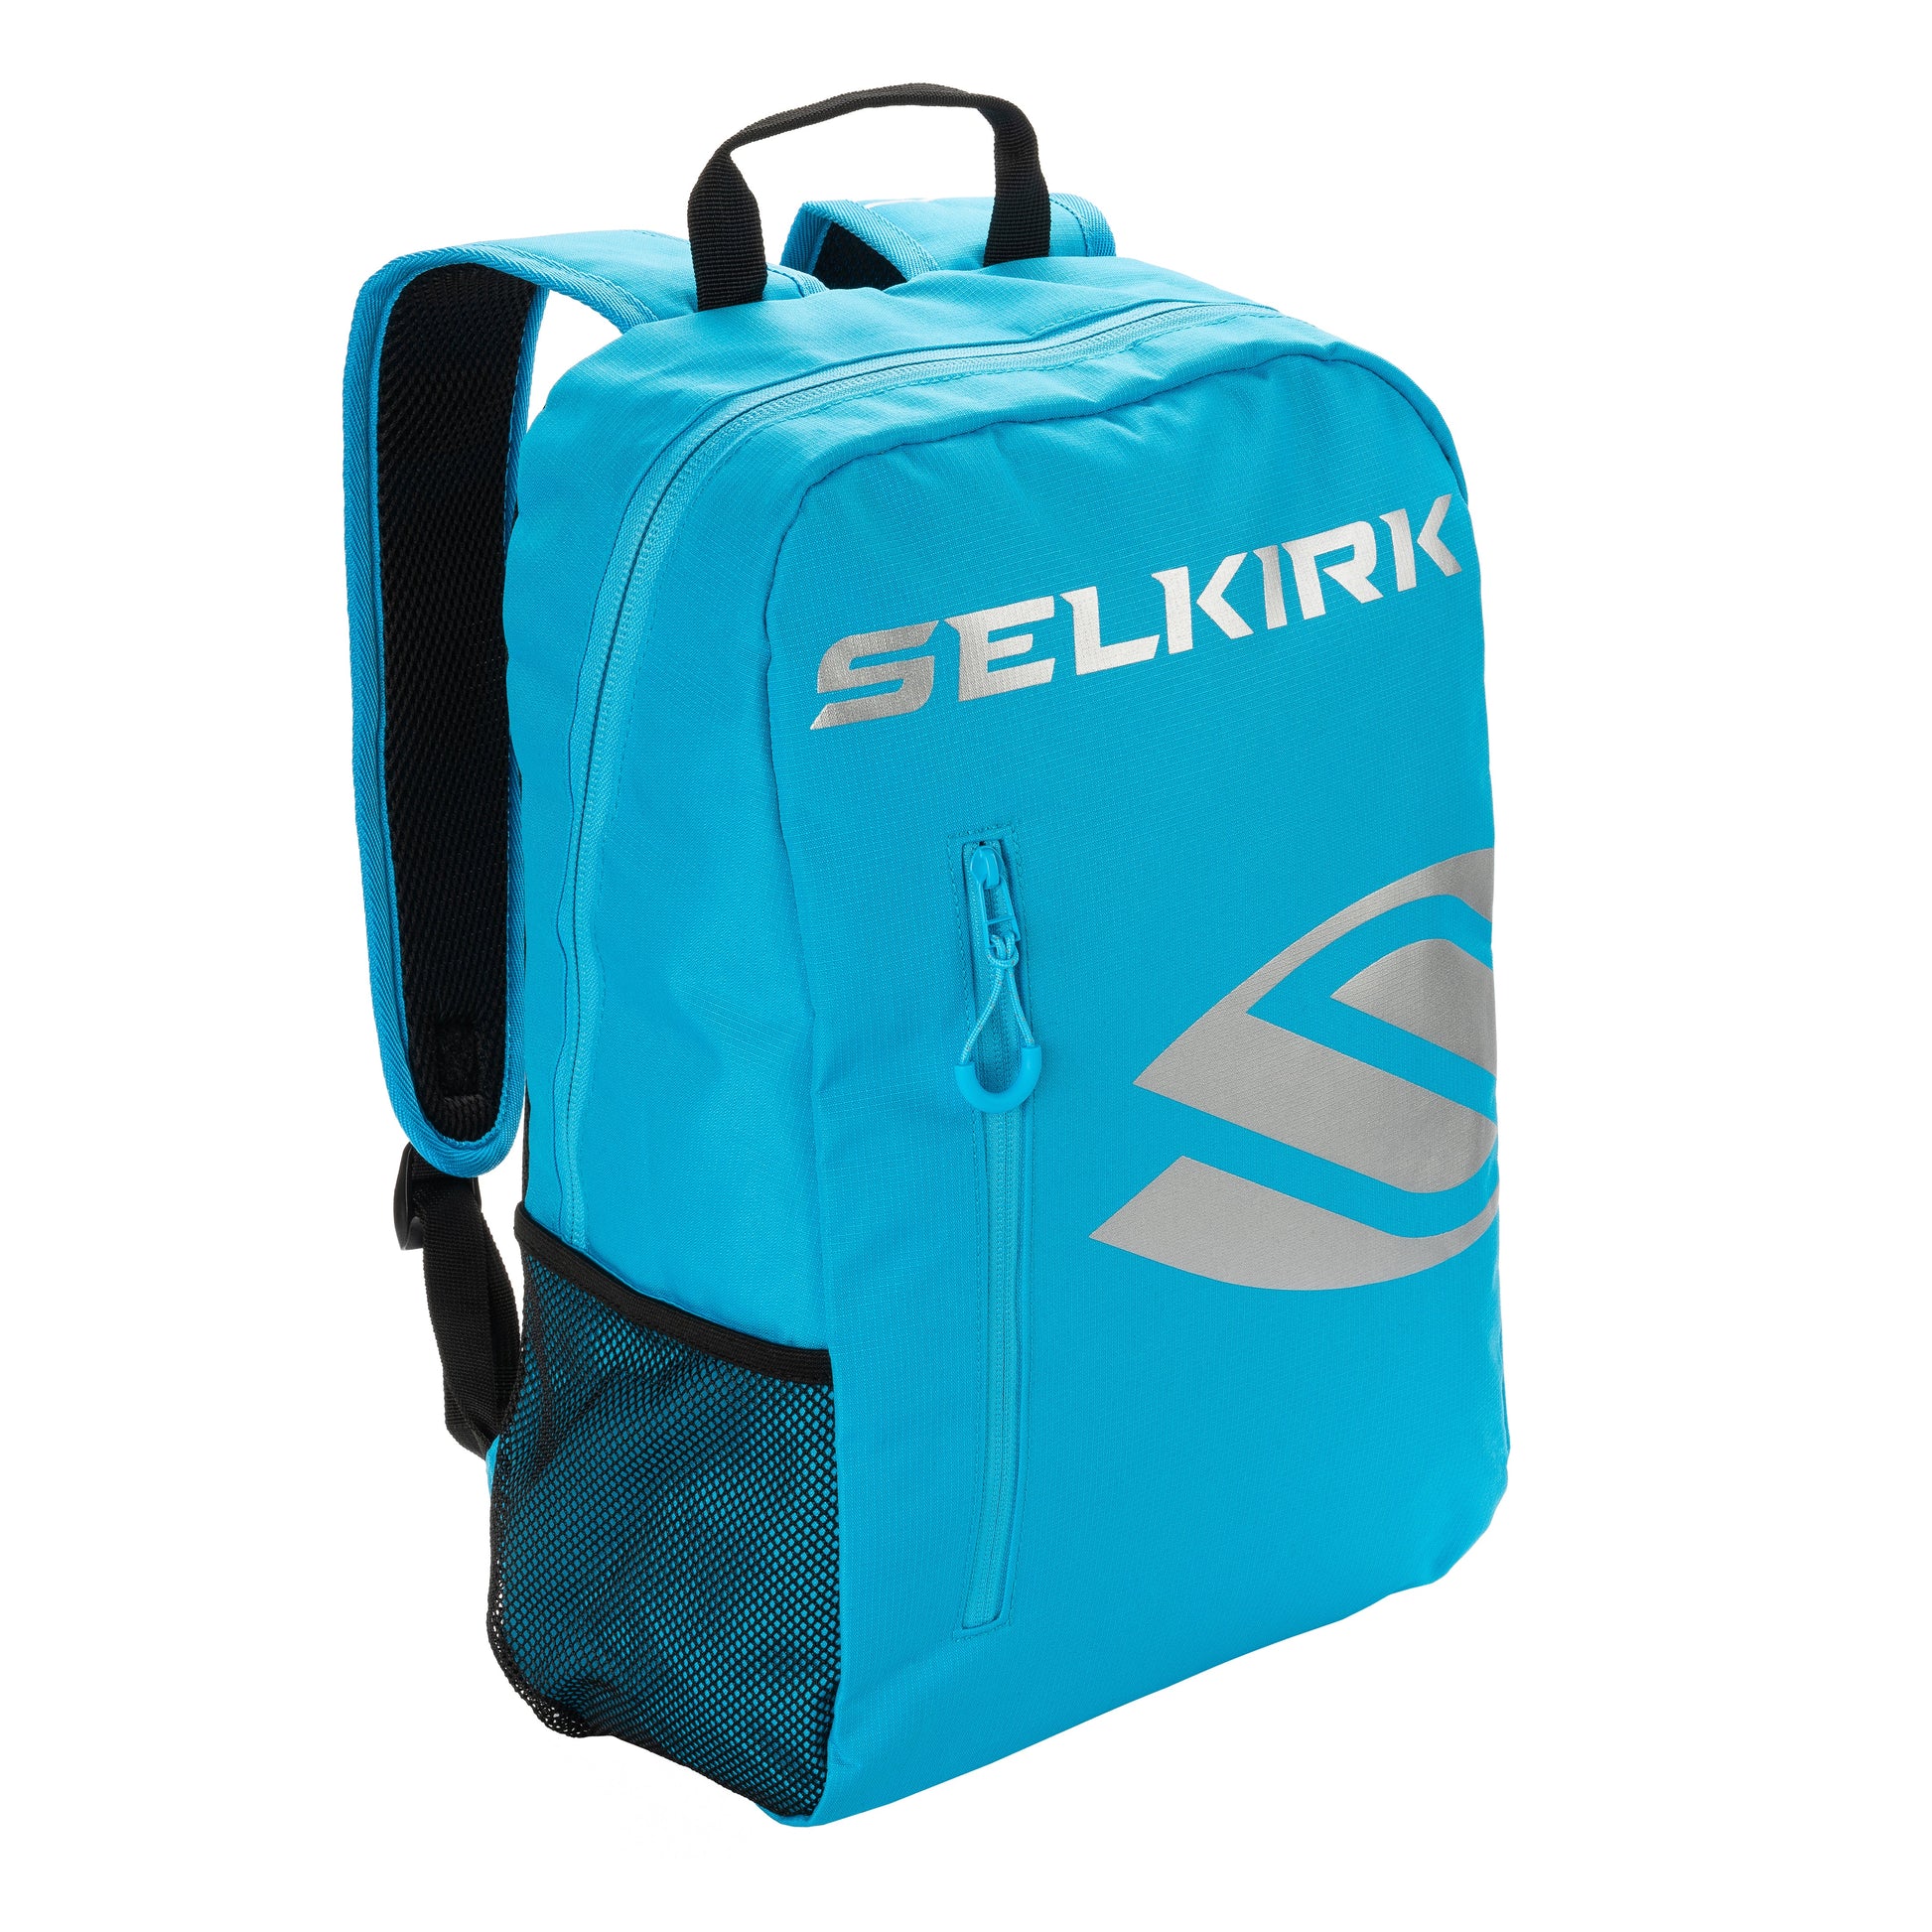 A Selkirk Core Series Day Backpack Pickleball Bag with the word Selkirk on it.